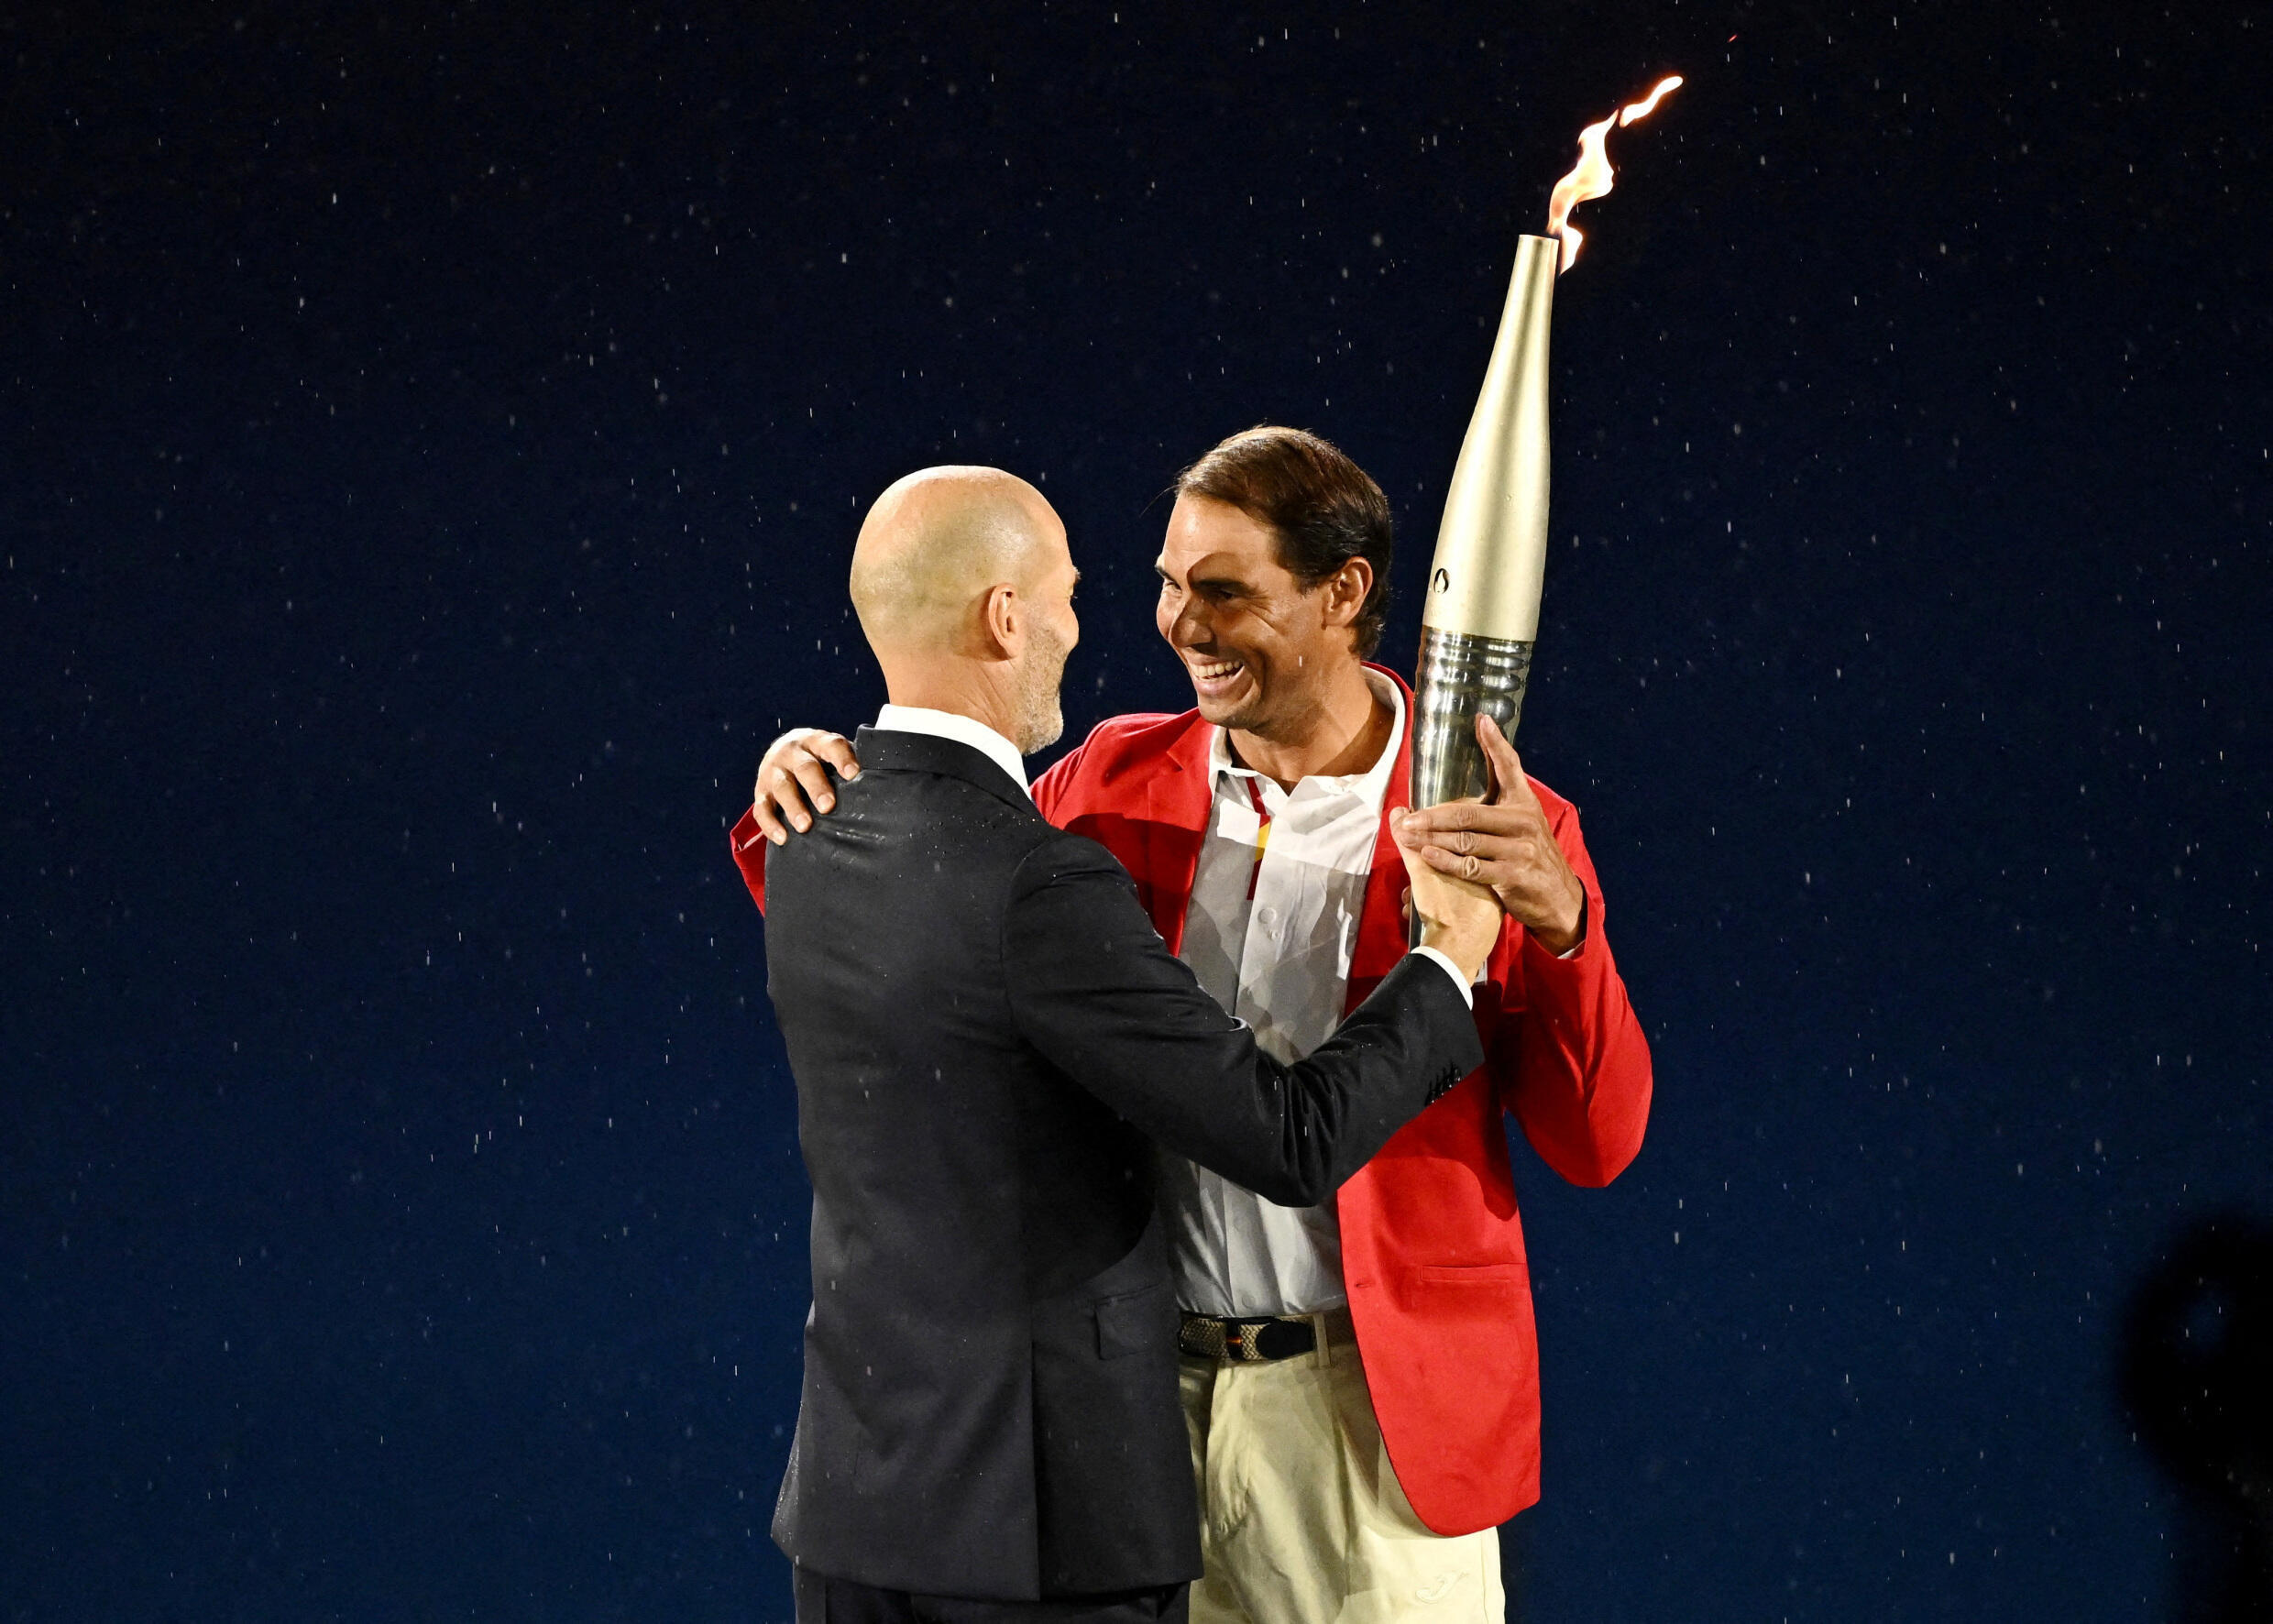 Former footballer Zinedine Zidane passes the Olympic flame to tennis player Rafael Nadal during the opening ceremony of the Paris 2024 Olympic Games on July 26, 2024.